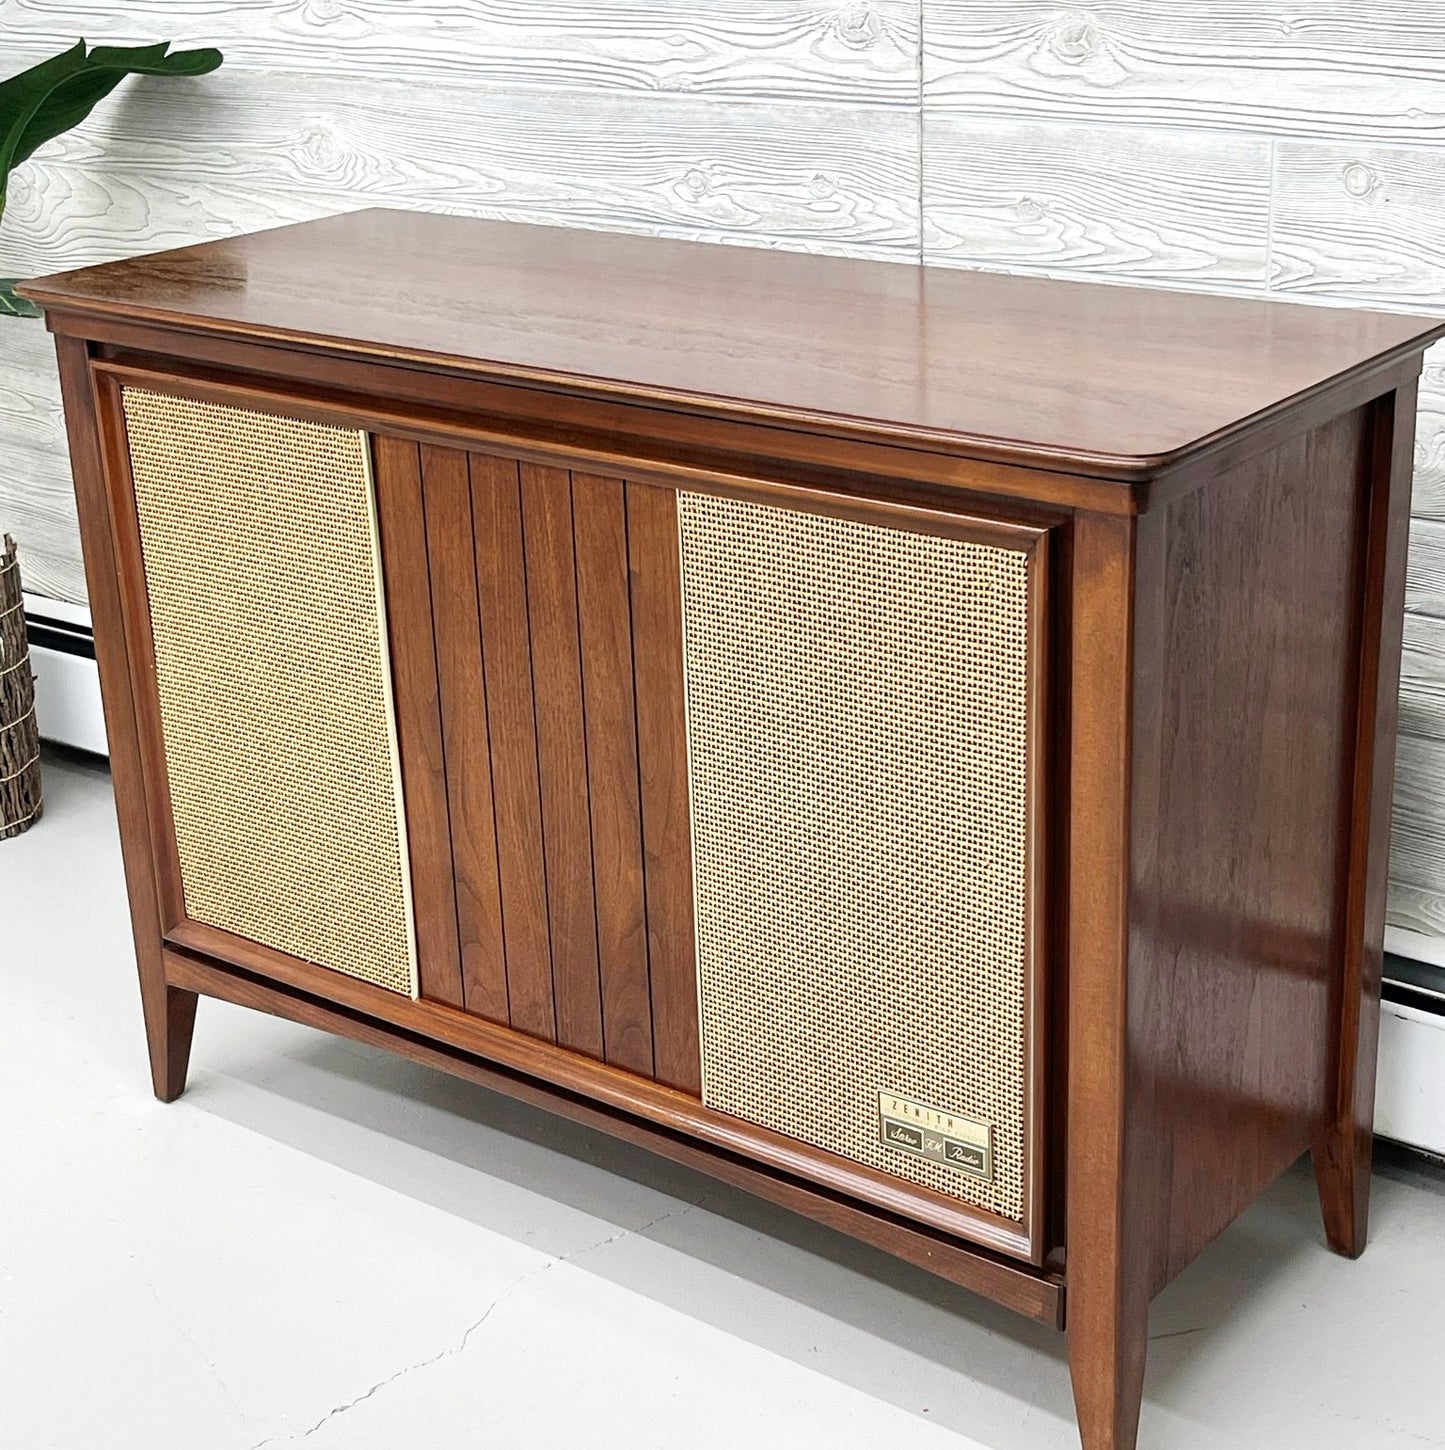 ZENITH Mid Century 60s Stereo Console Record Player Changer AM FM Bluetooth The Vintedge Co.